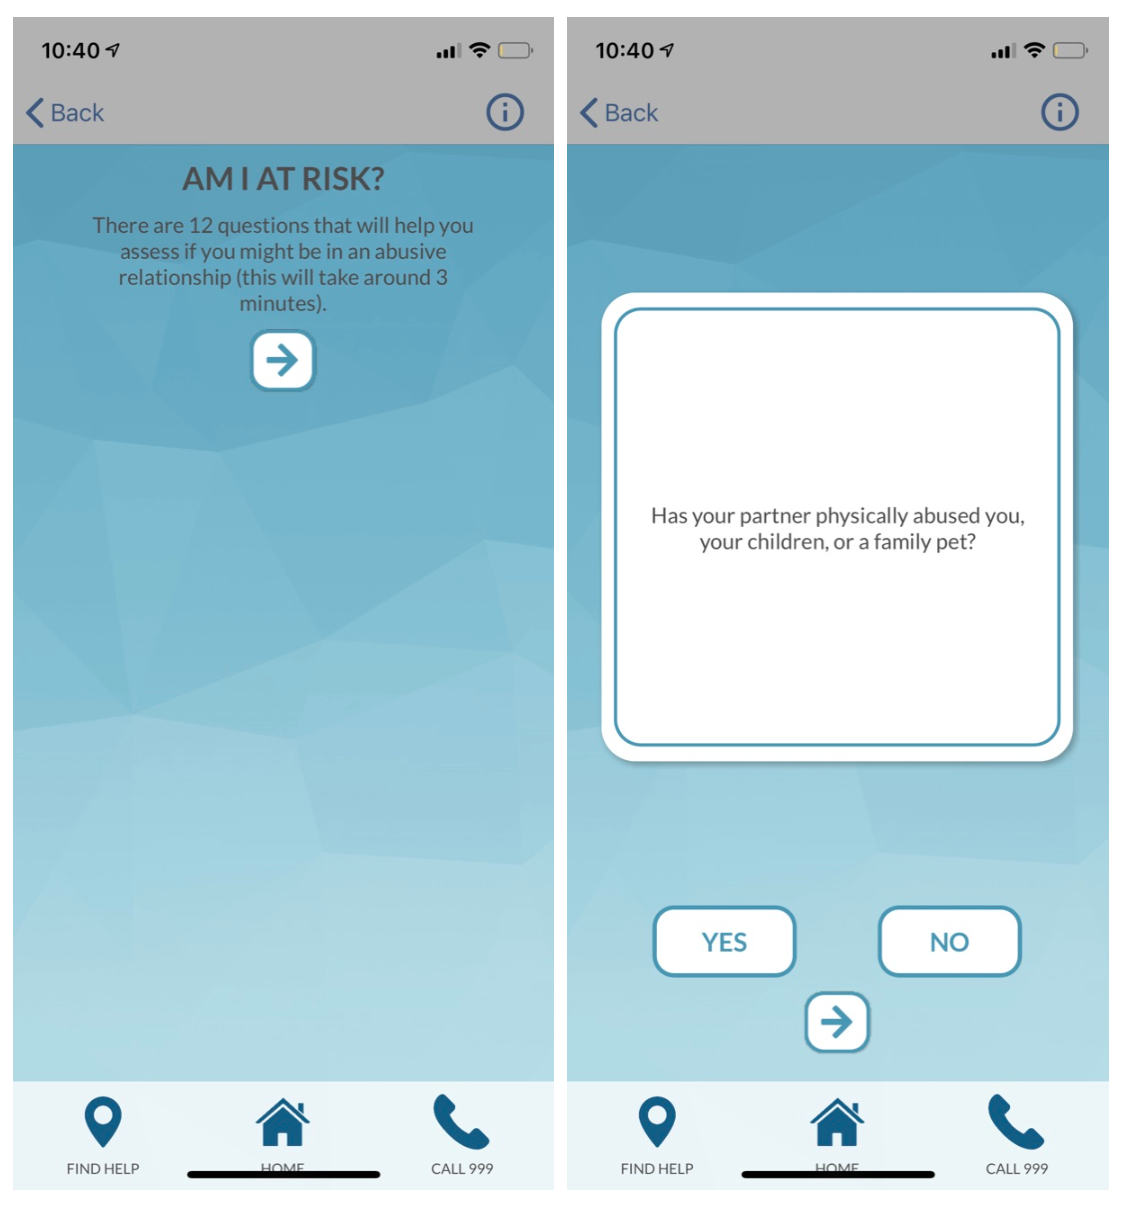 2 screenshots of the old app. The first screenshot has a question asking "Am I at Risk?" and the second screenshot shows another question. It asks "Has your partner physically abused you, your children, or a family pet?"